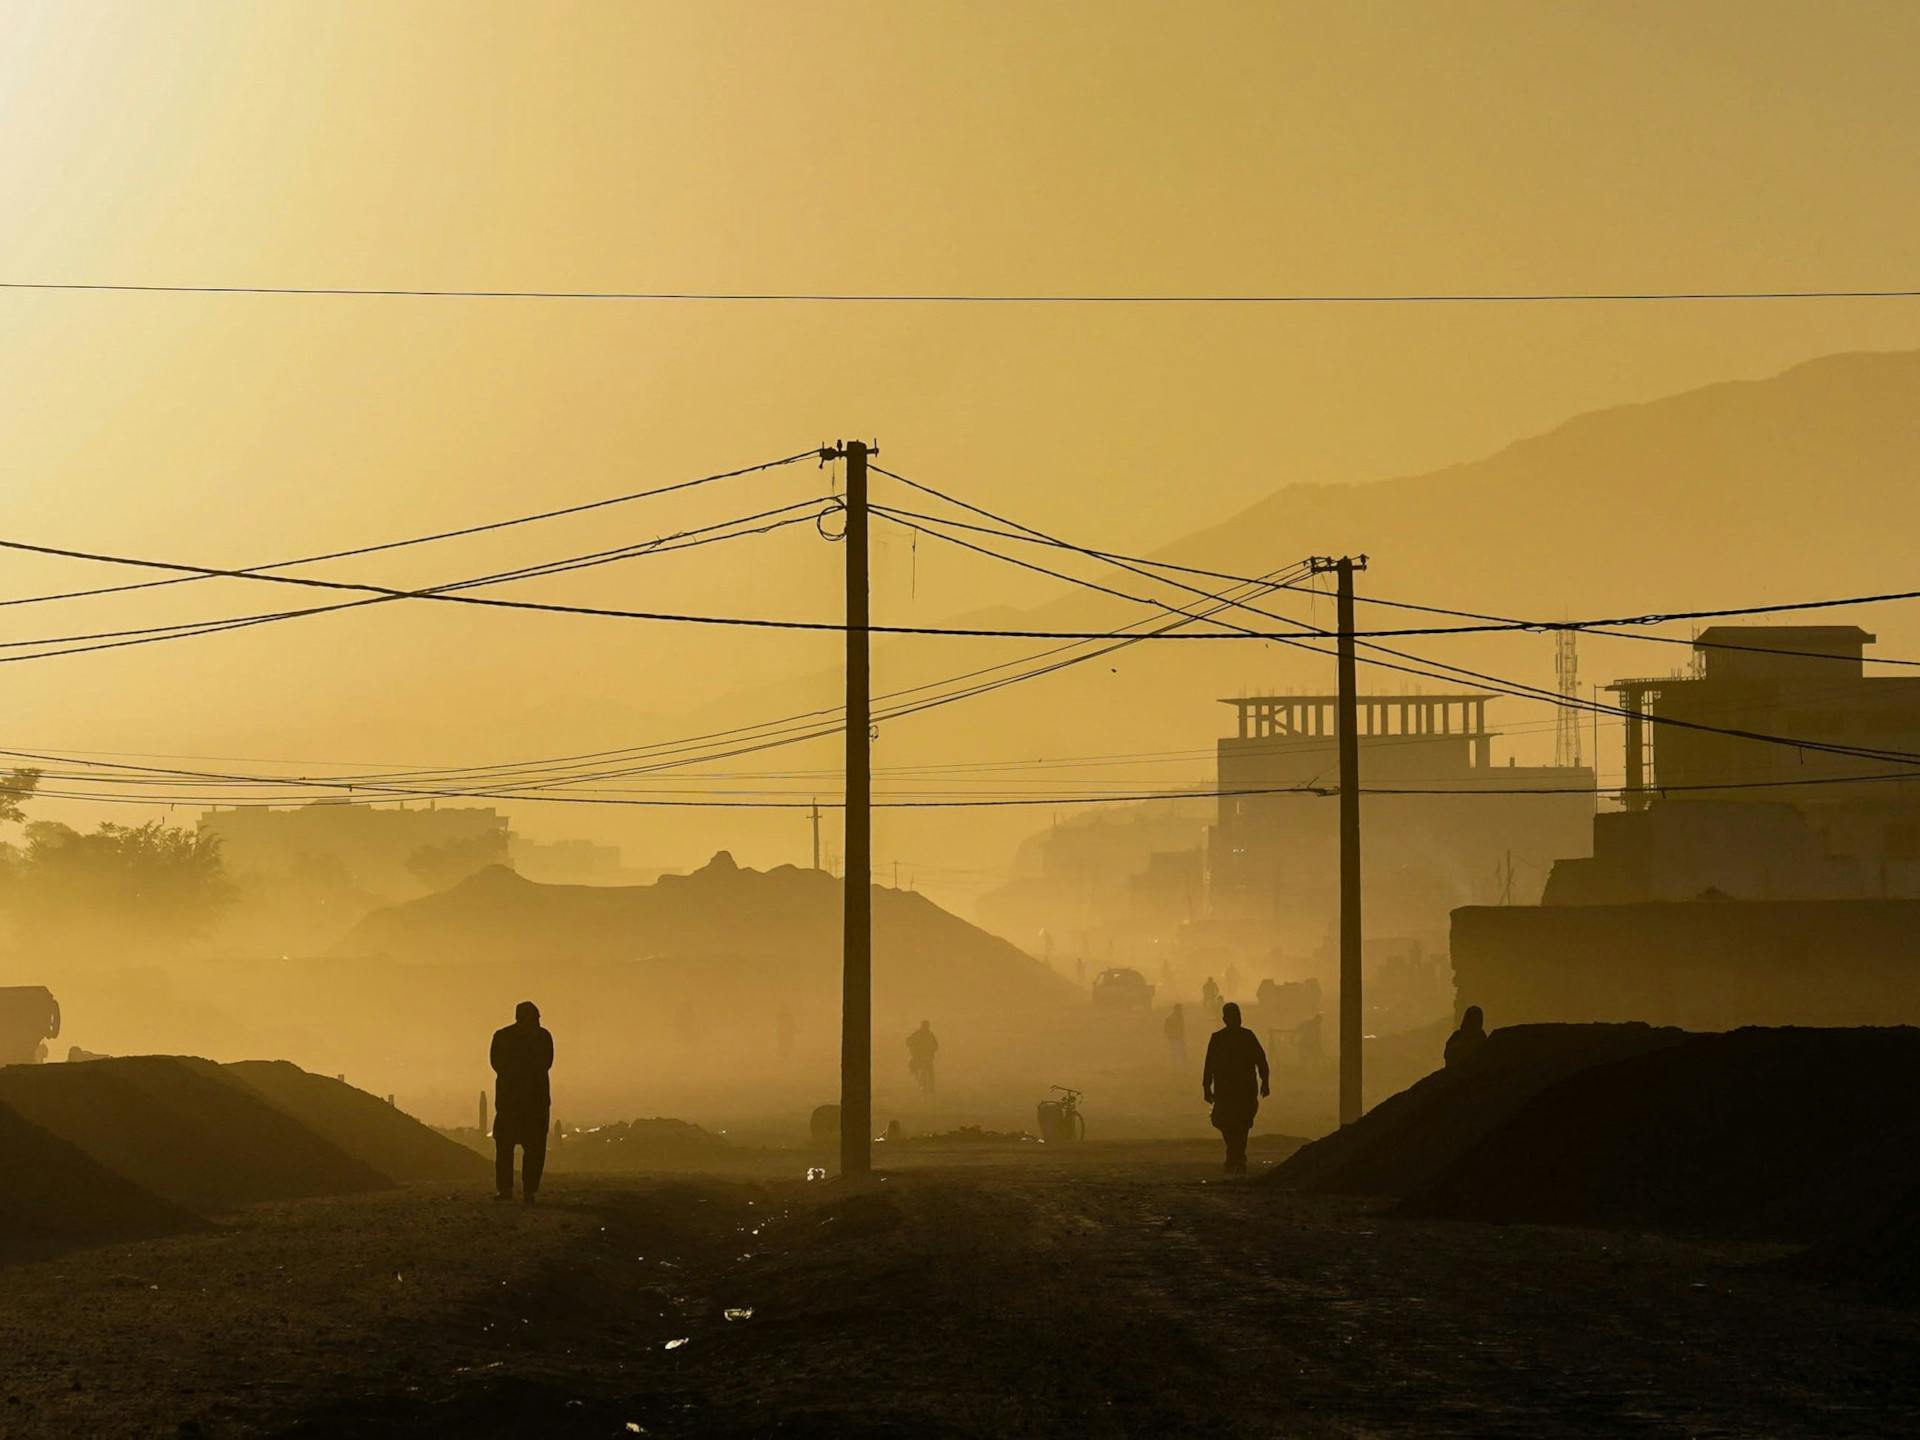 The silhouettes of people on the street in the Afghan capital Kabul as the sun rises.